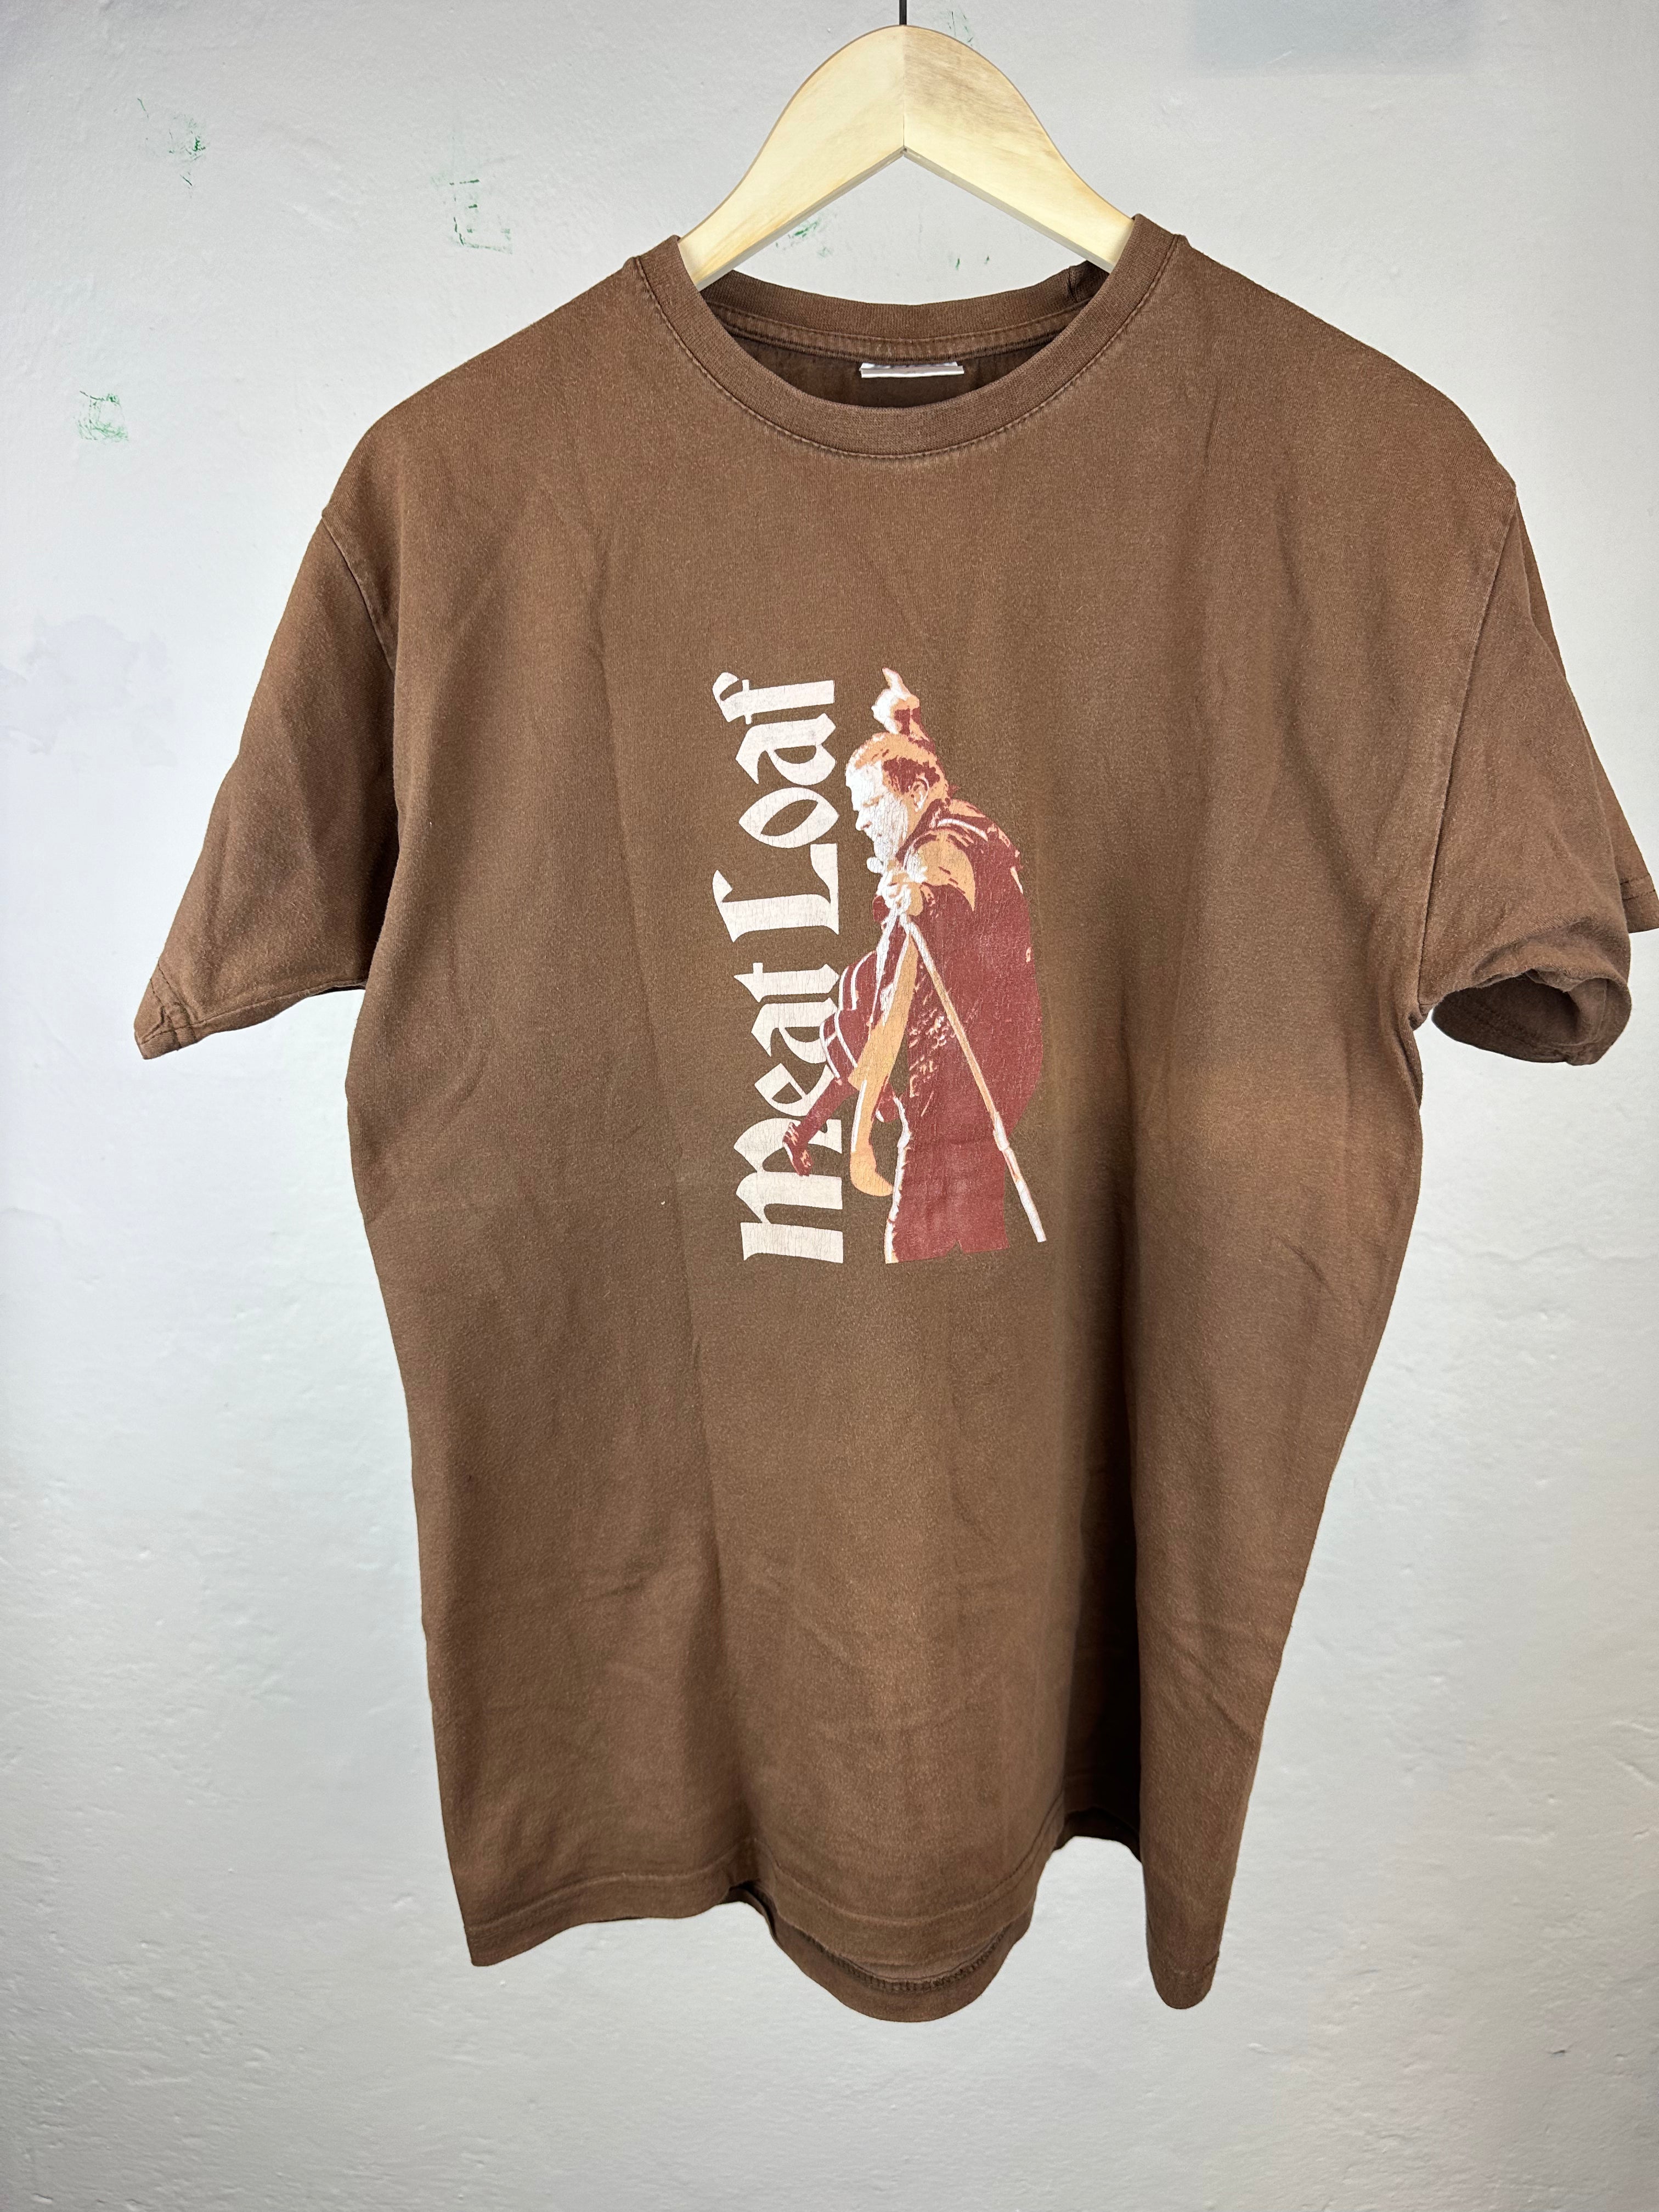 Vintage Meat Loaf "Hair of the Dog Tour 2005" T-shirt